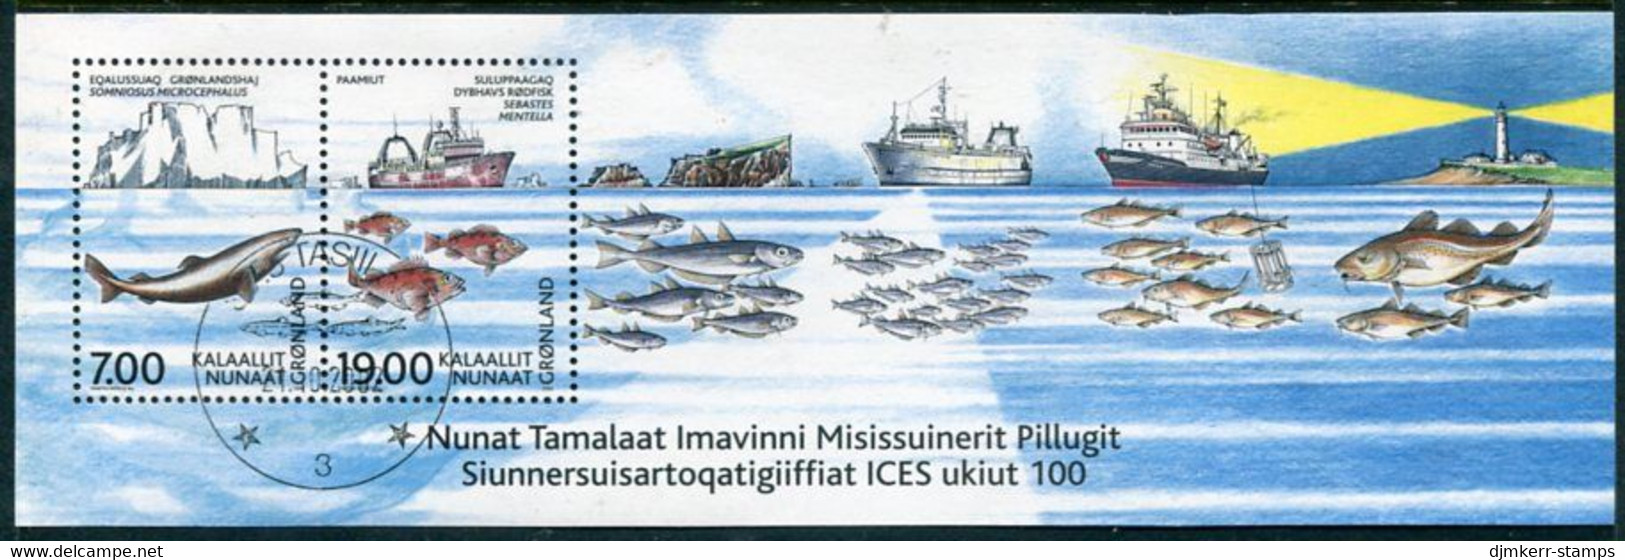 GREENLAND 2002 Marine Research Block Used.  Michel Block 24 - Used Stamps